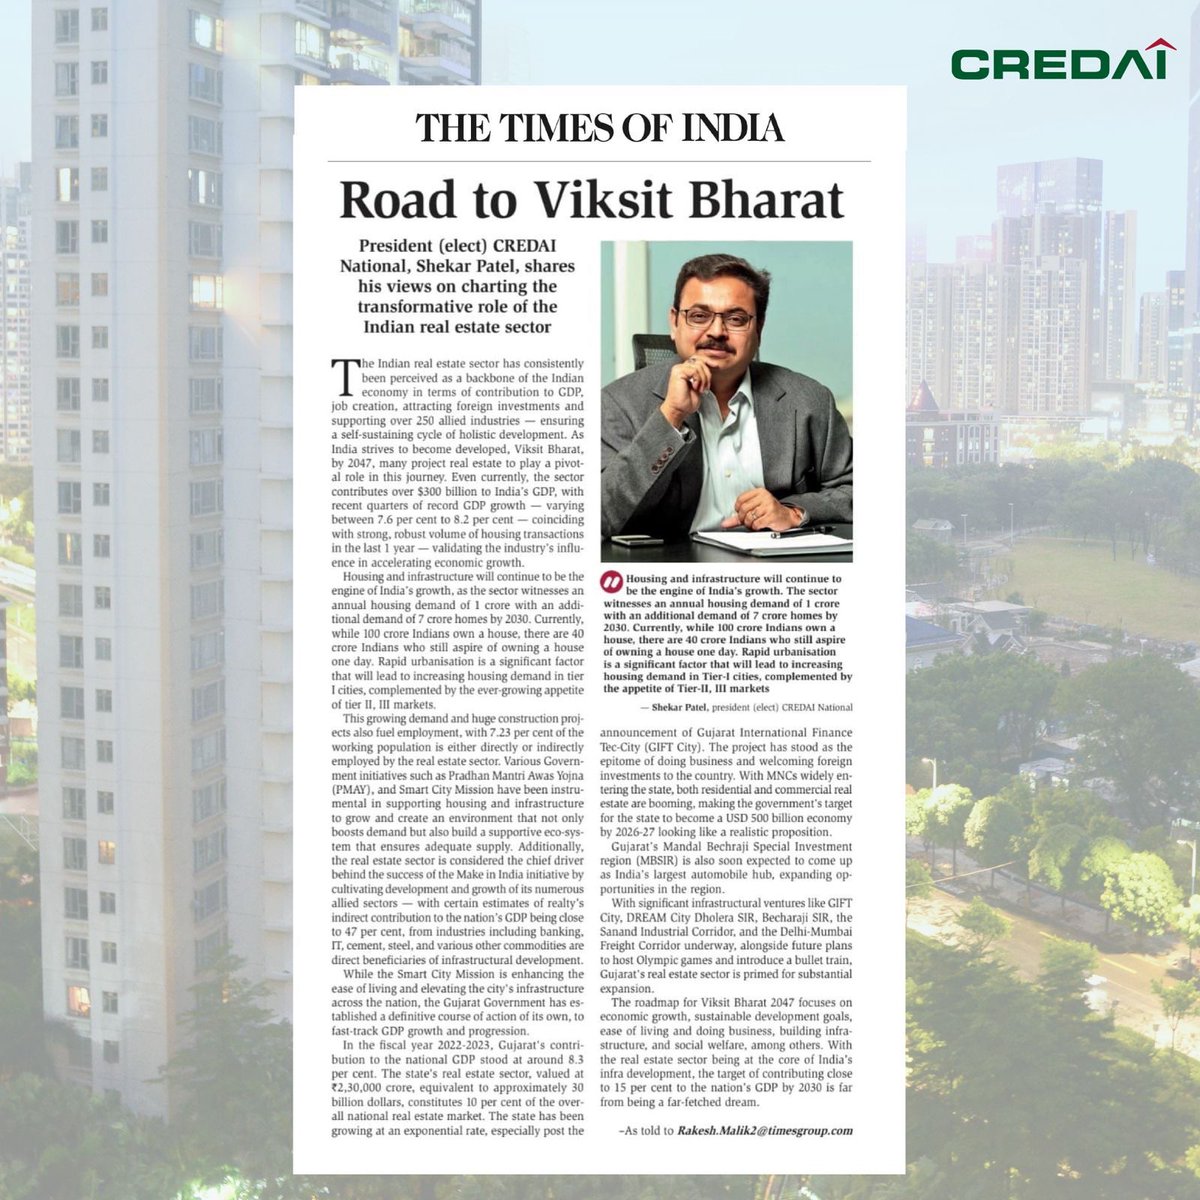 In the recent article published in The Times of India, Mr. Shekhar G Patel, President-Elect of CREDAI, stated that the Viksit Bharat vision is fueled by the real estate sector. With an existing contribution of $300 billion to India’s GDP, this sector is poised to bring about